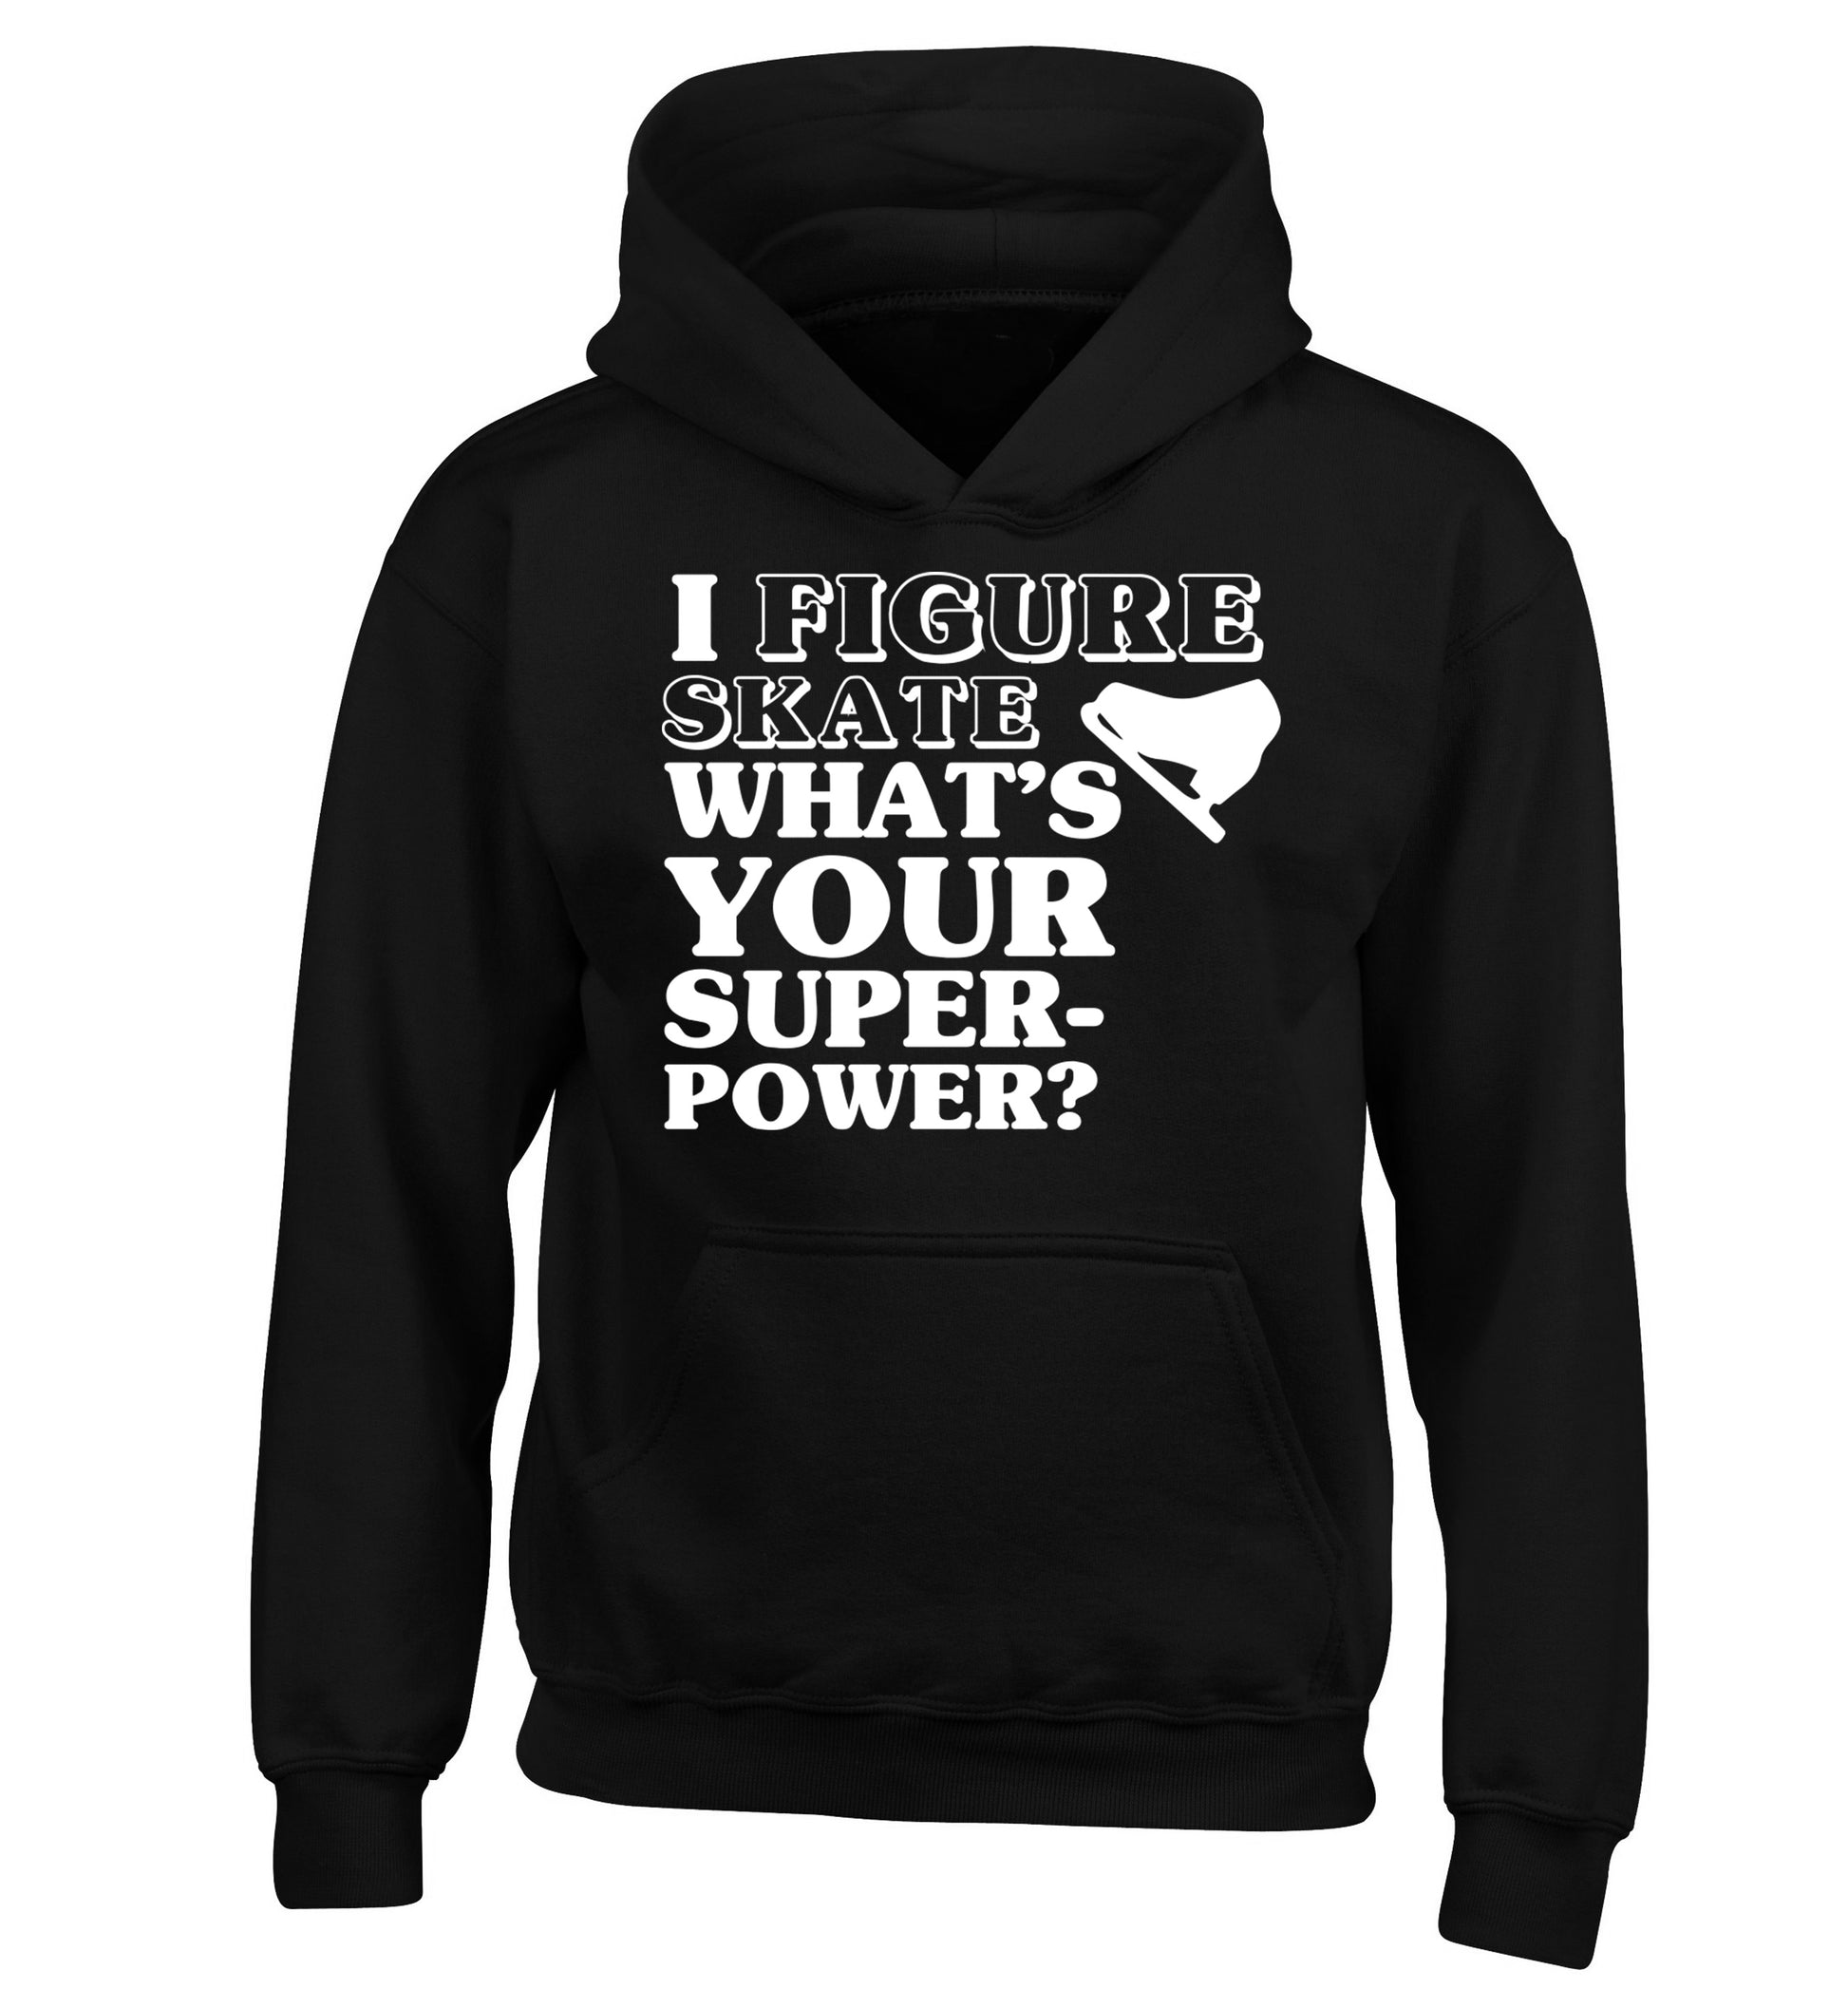 I figure skate what's your superpower? children's black hoodie 12-14 Years